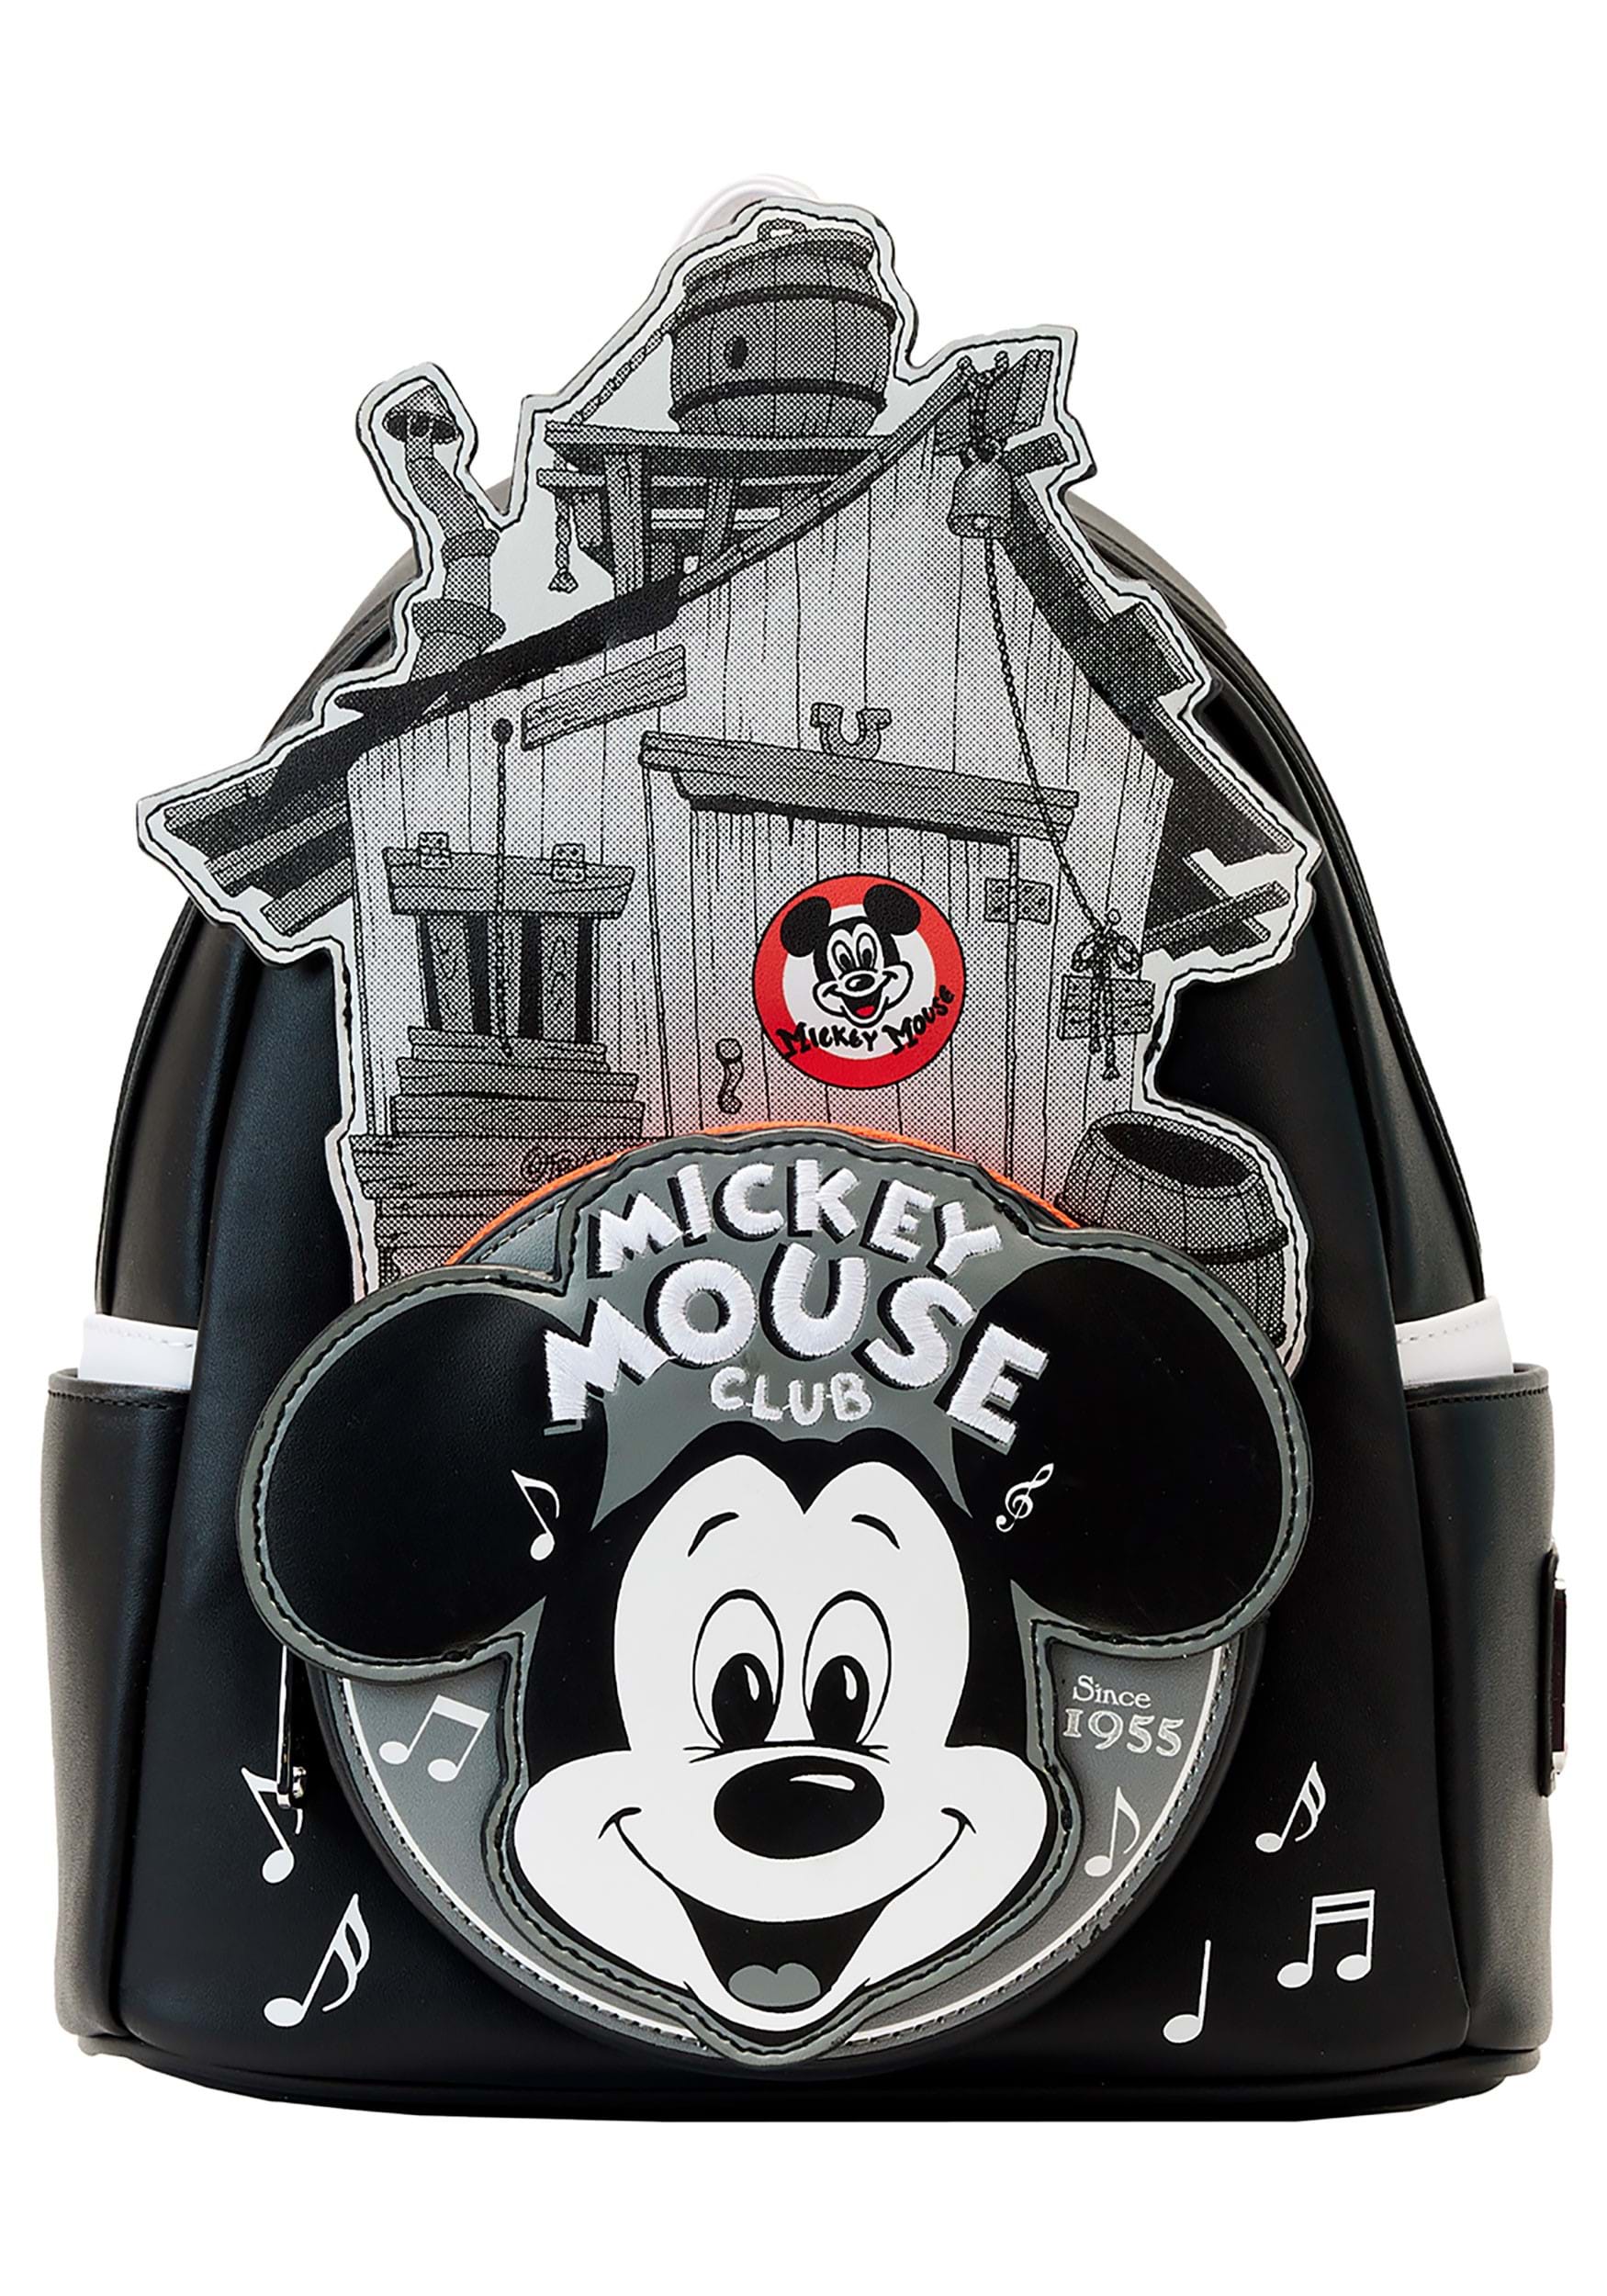 Loungefly Disney 100th Anniversary Mickey & Friends Mini Backpack